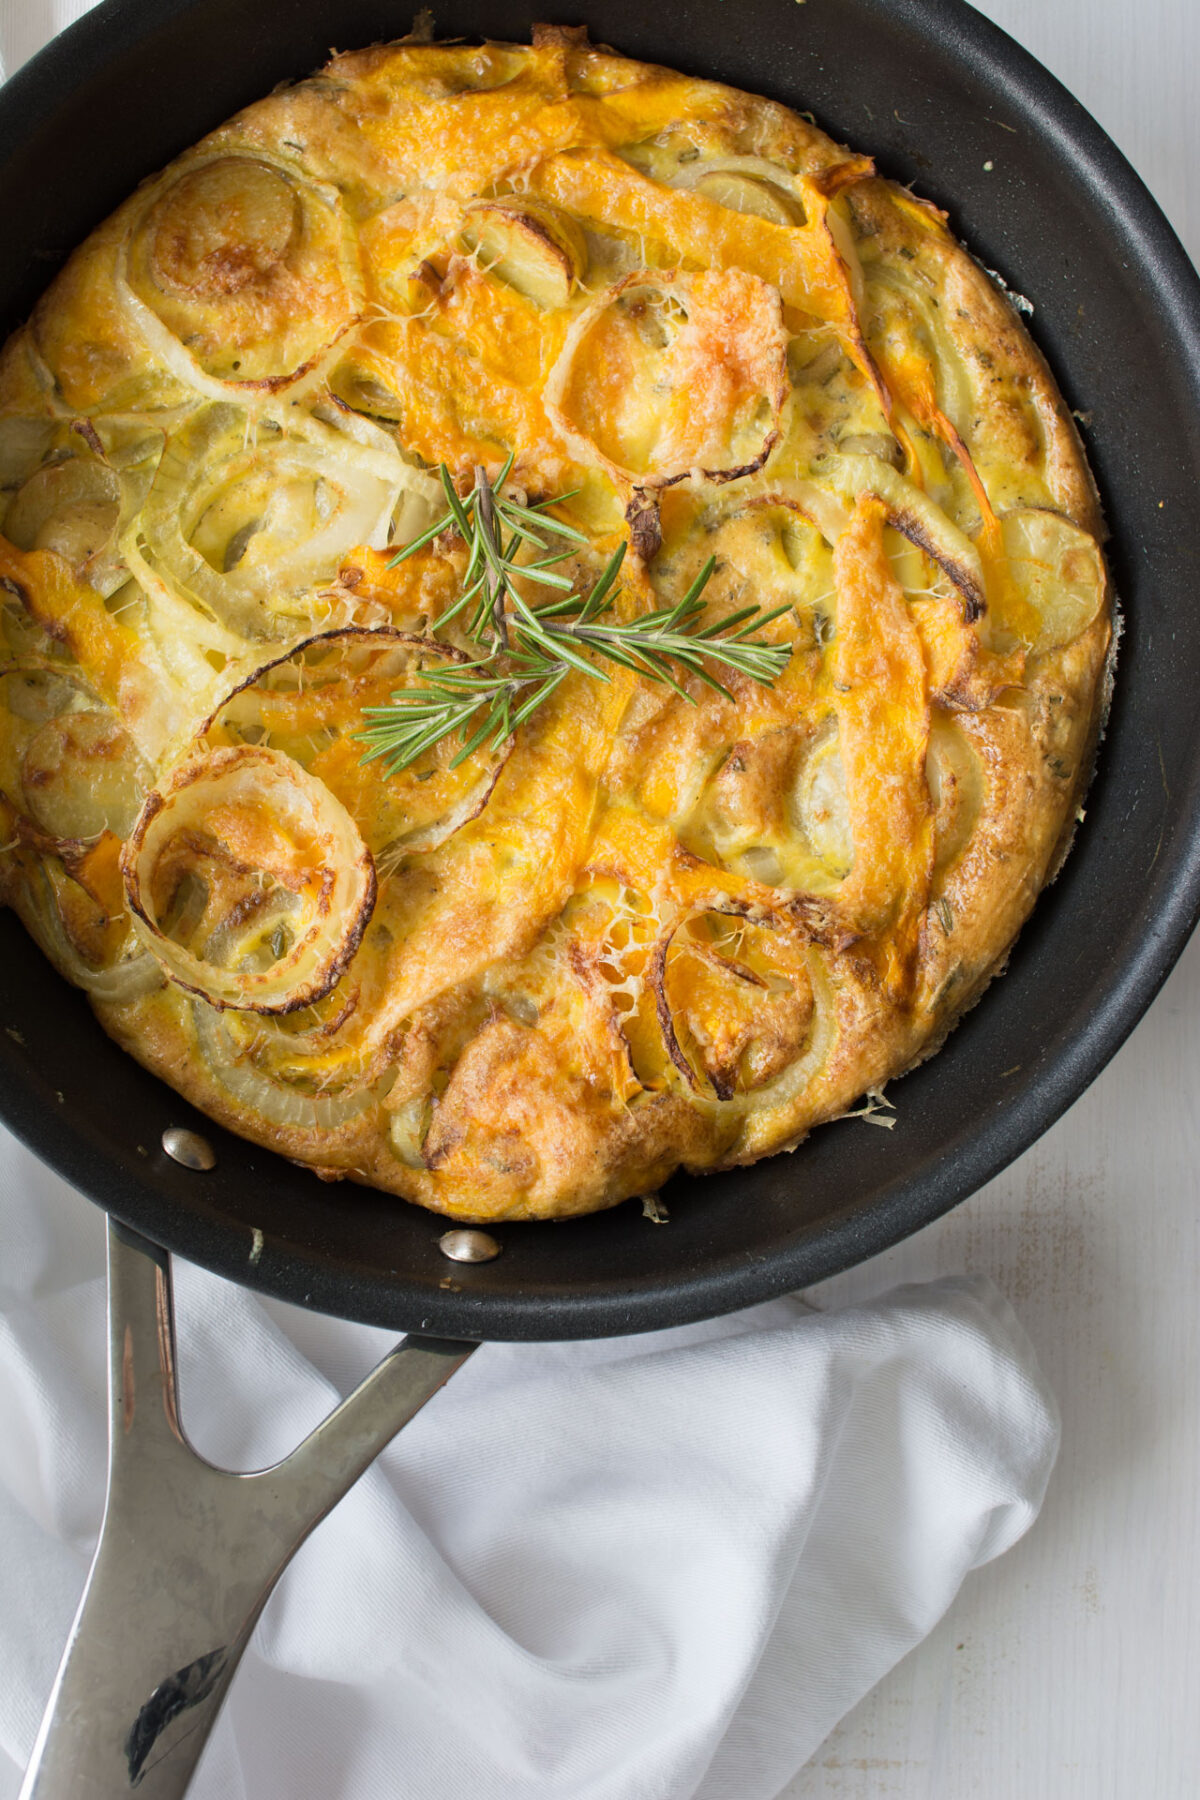 top down view image of a freshly baked Butternut Squash Frittata in a wok, topped with fragrant rosemary